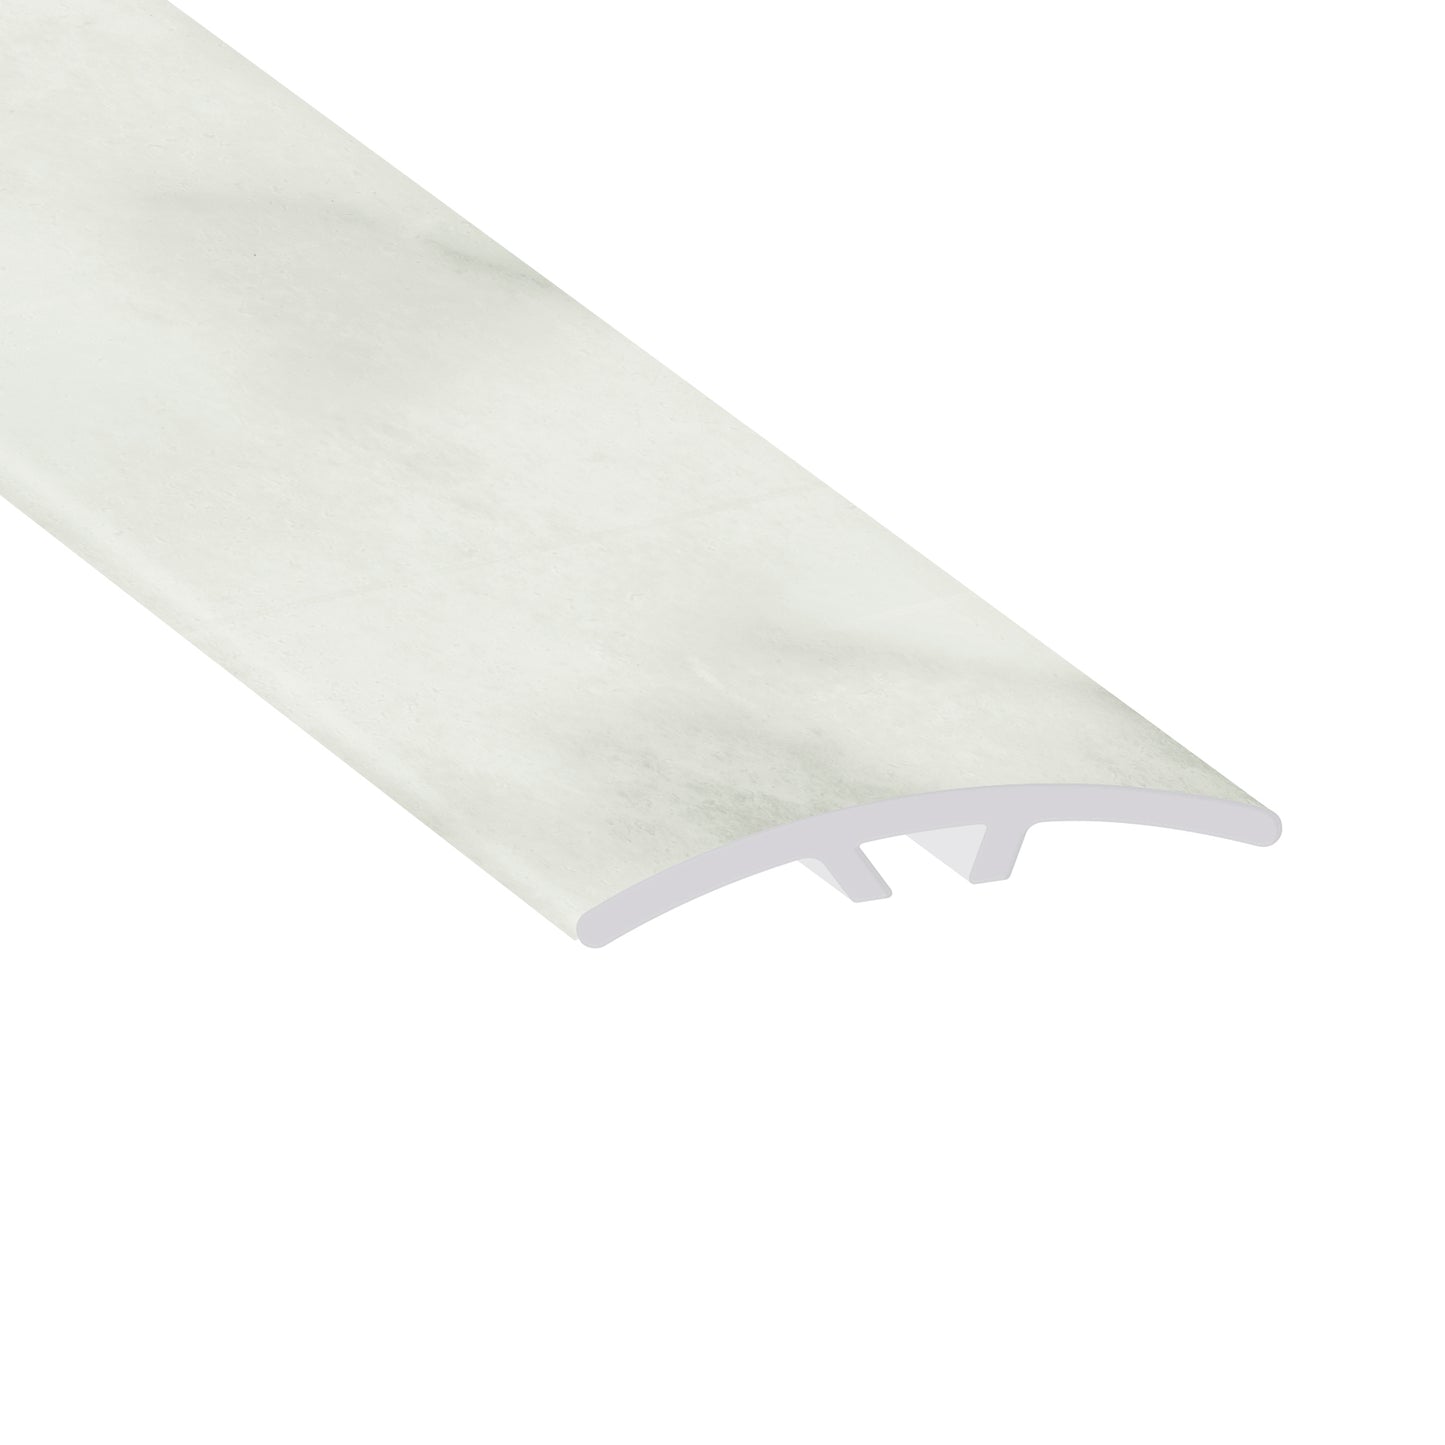 Morning Mist 0.23 in. Thich x 1.59 in. Width x 94 in. Length Multi-Purpose Reducer Vinyl Molding